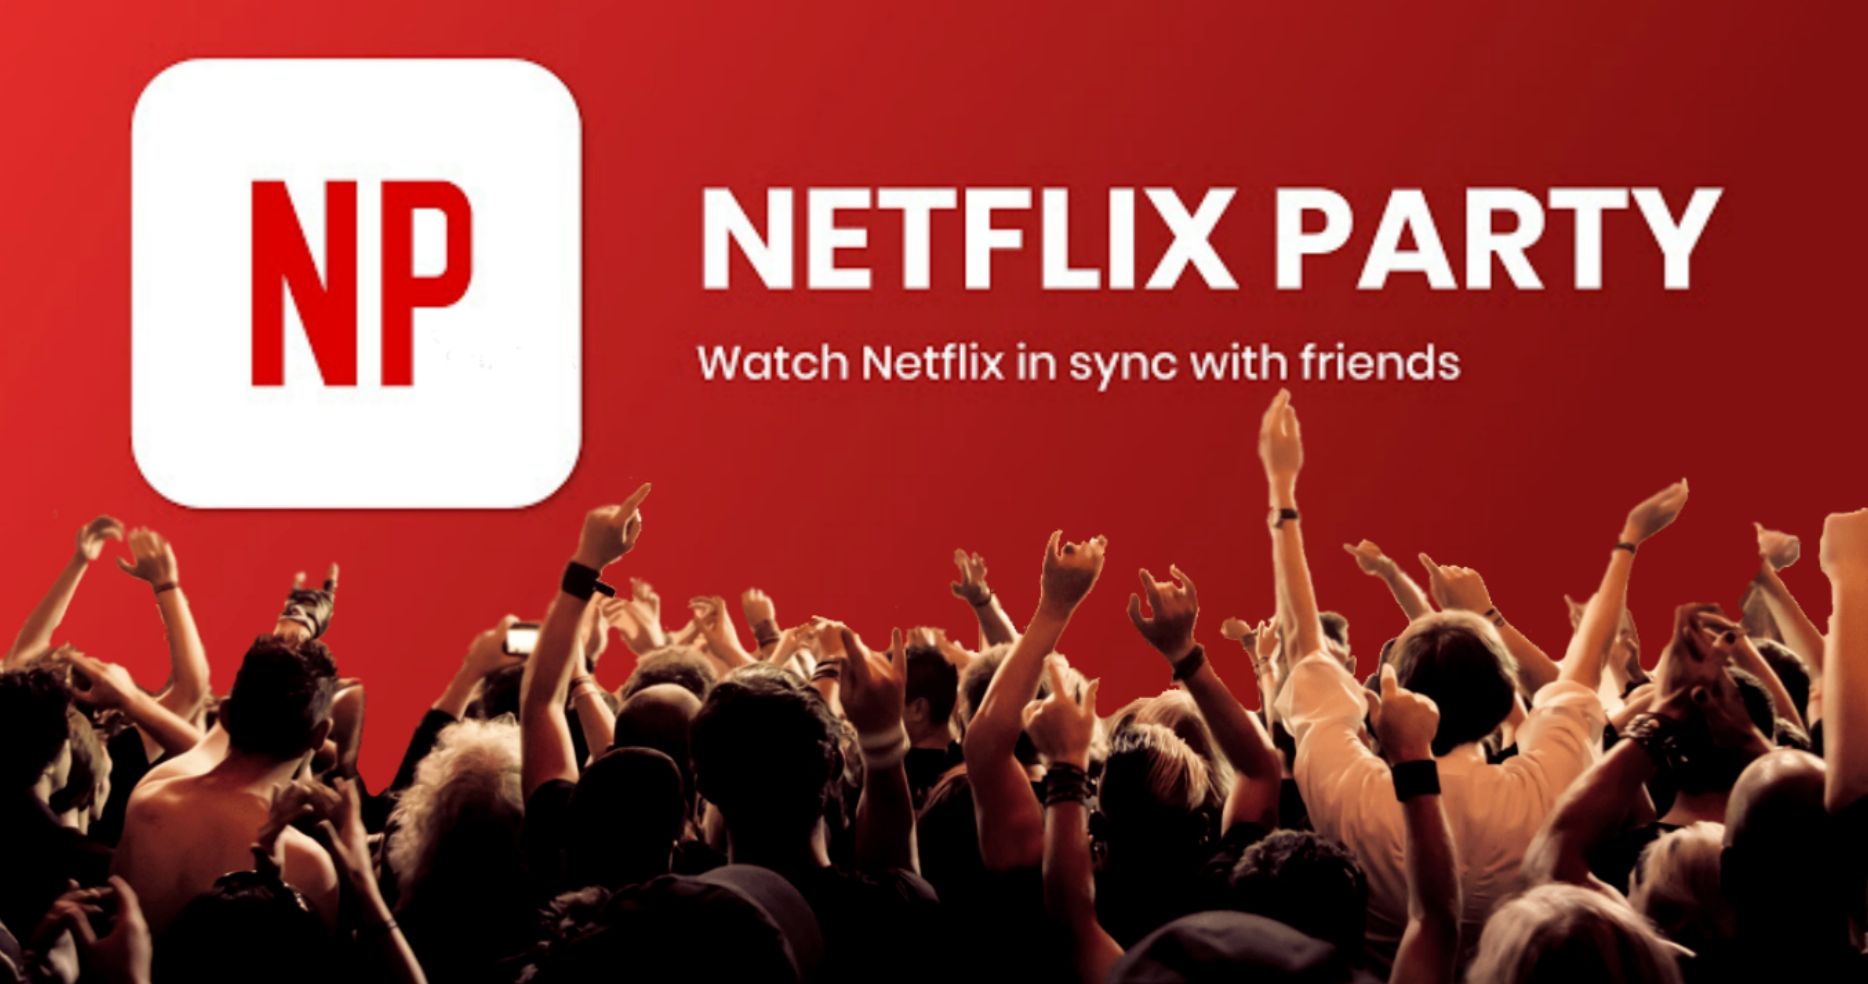 Netflix Party Brings Movie Night to Social Distancing, Here's How to Watch with Friends